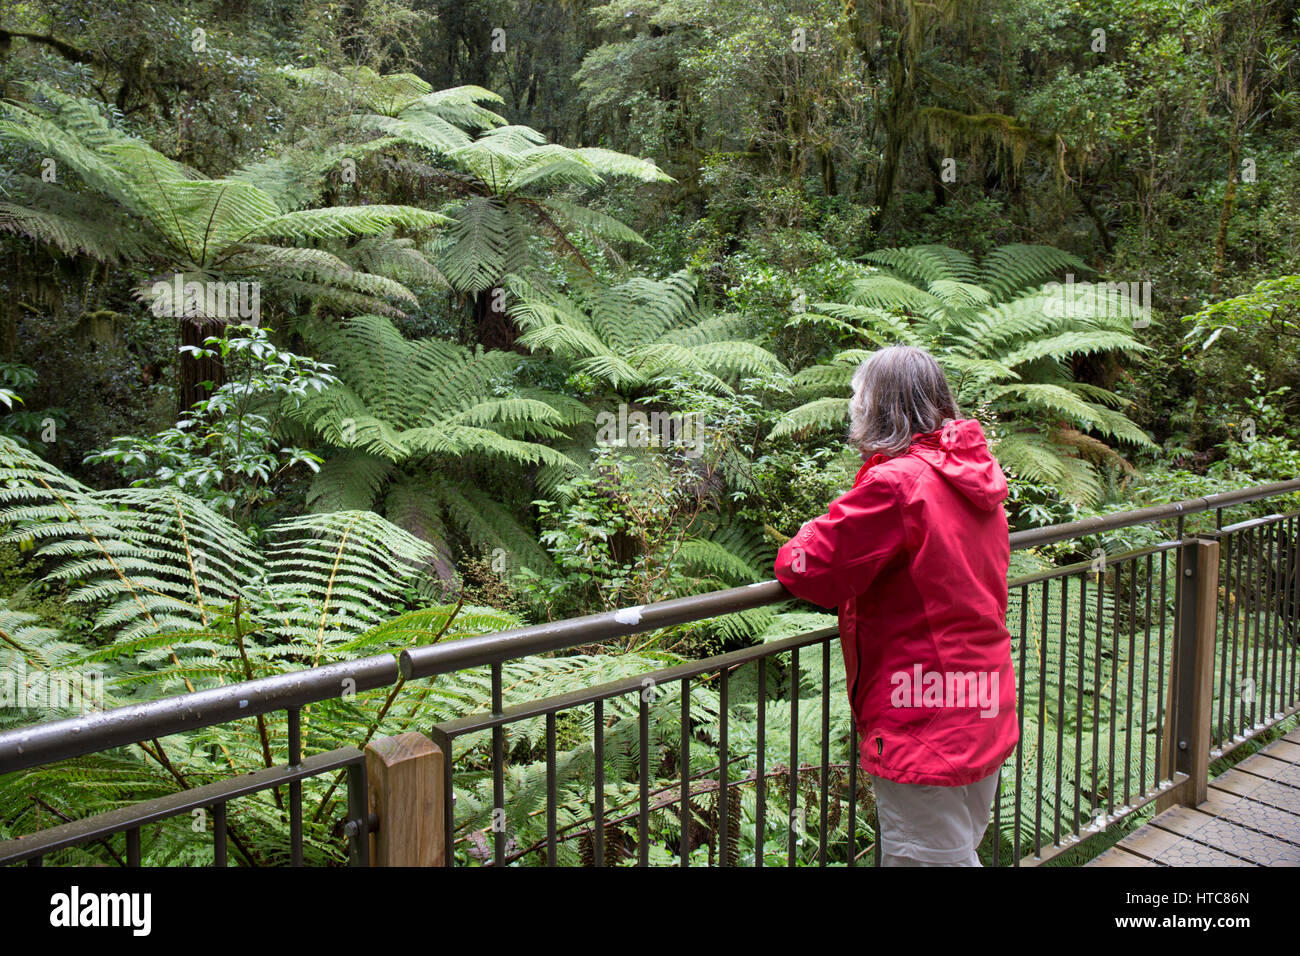 Milford Sound, Fiordland National Park, Southland, New Zealand. Visitor admiring native ferns from bridge over the Cleddau River near the Chasm. Stock Photo